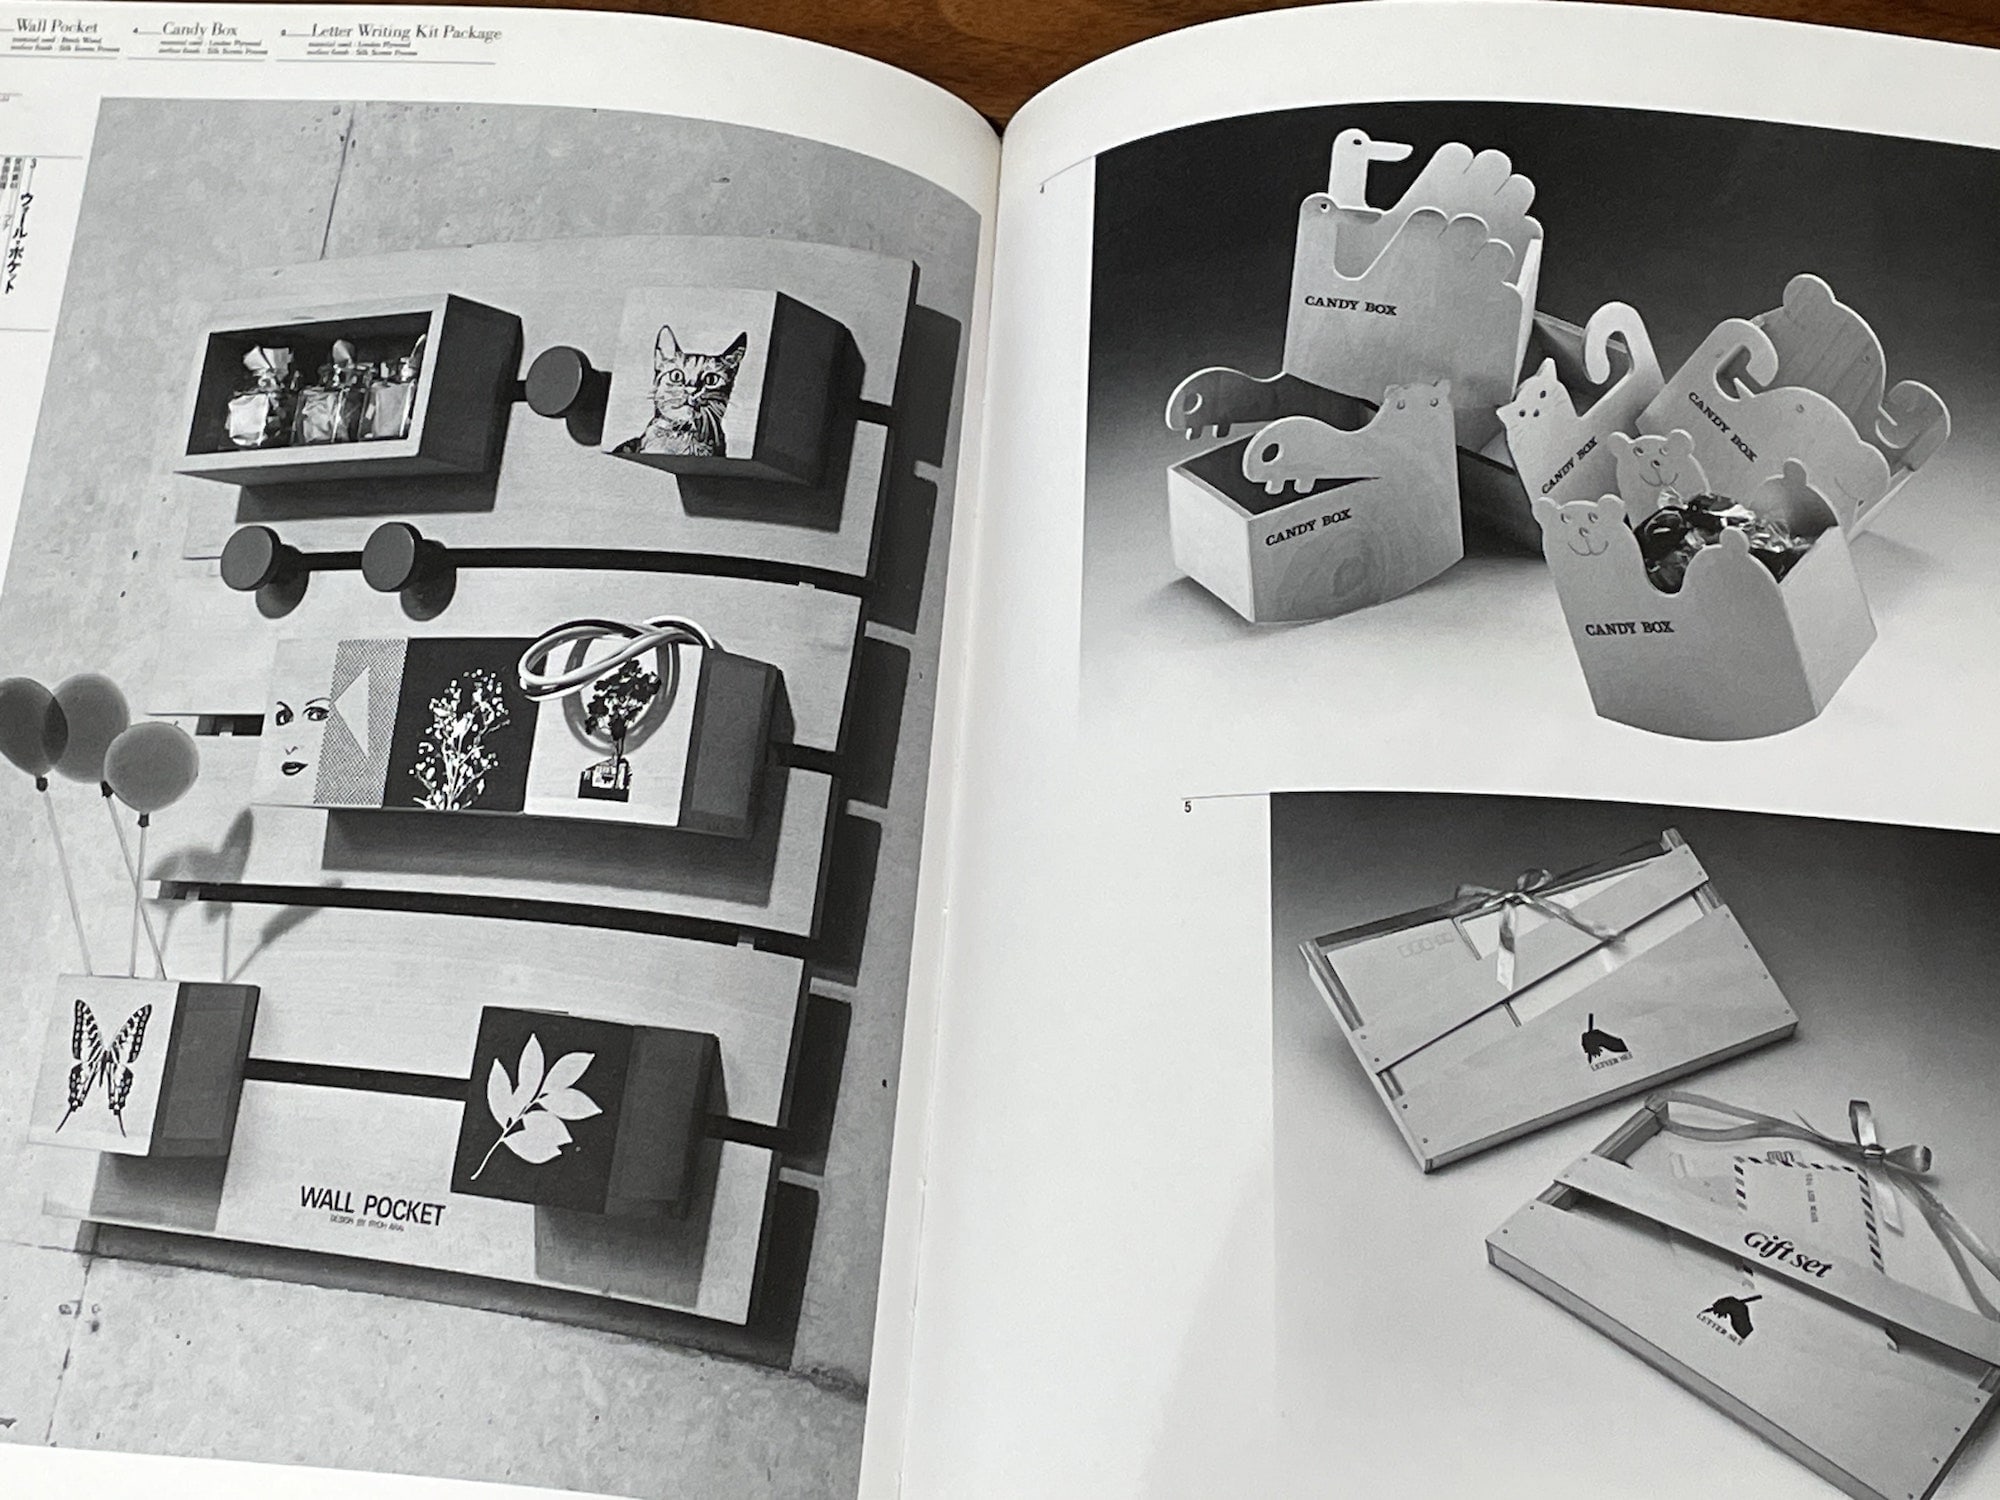 more greyscale photos of finely carved wood boxes recessed as a "wall pocket" and as animal figurine forms